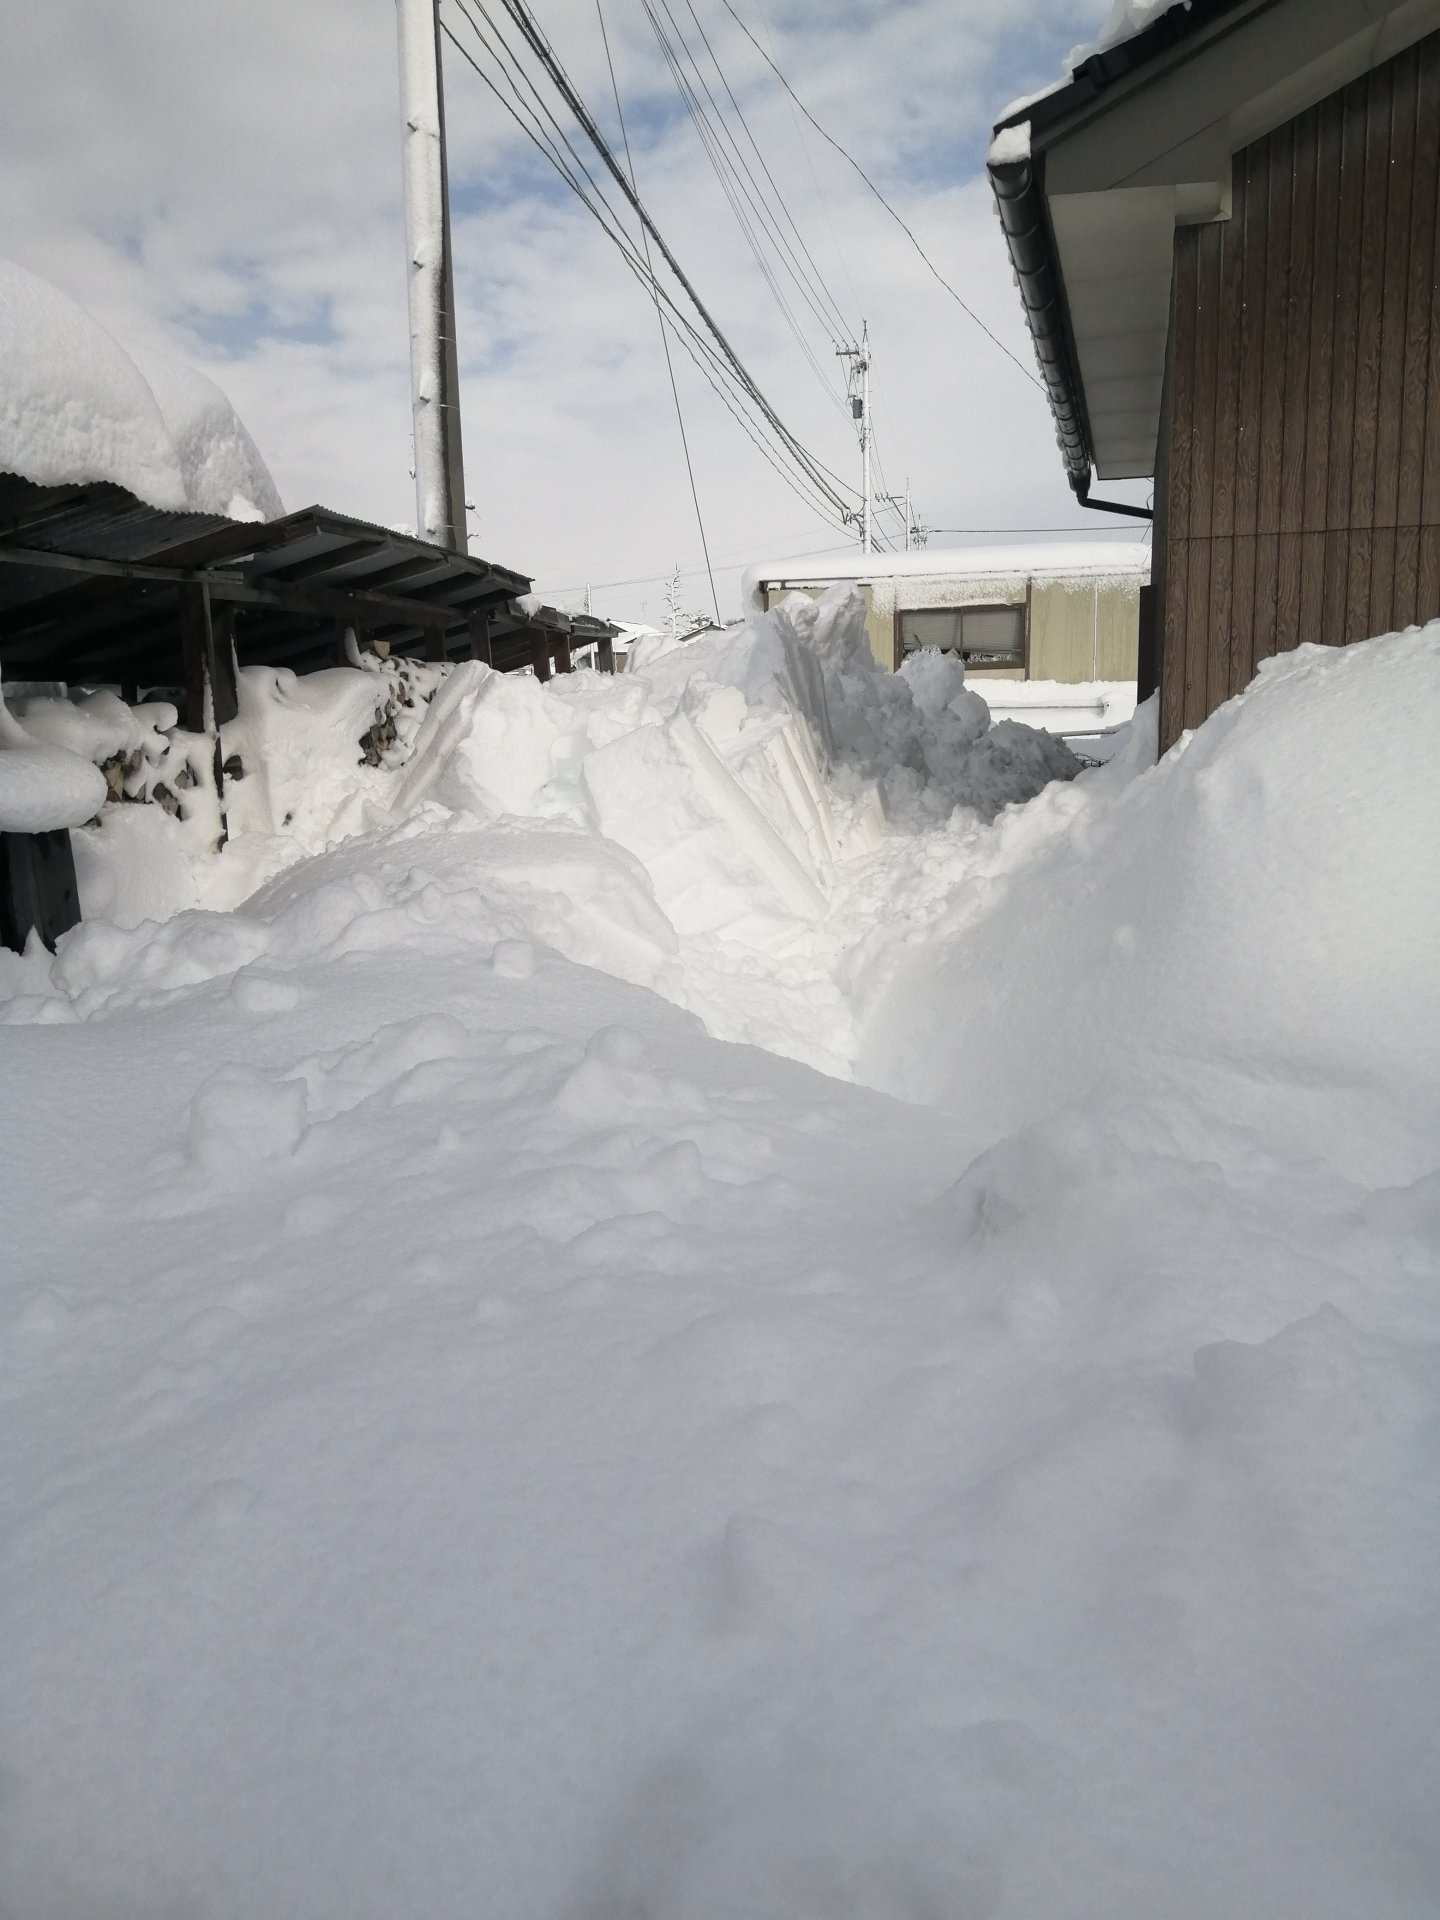 January 4th snowstorm left us with roughly 7 feet of snow.